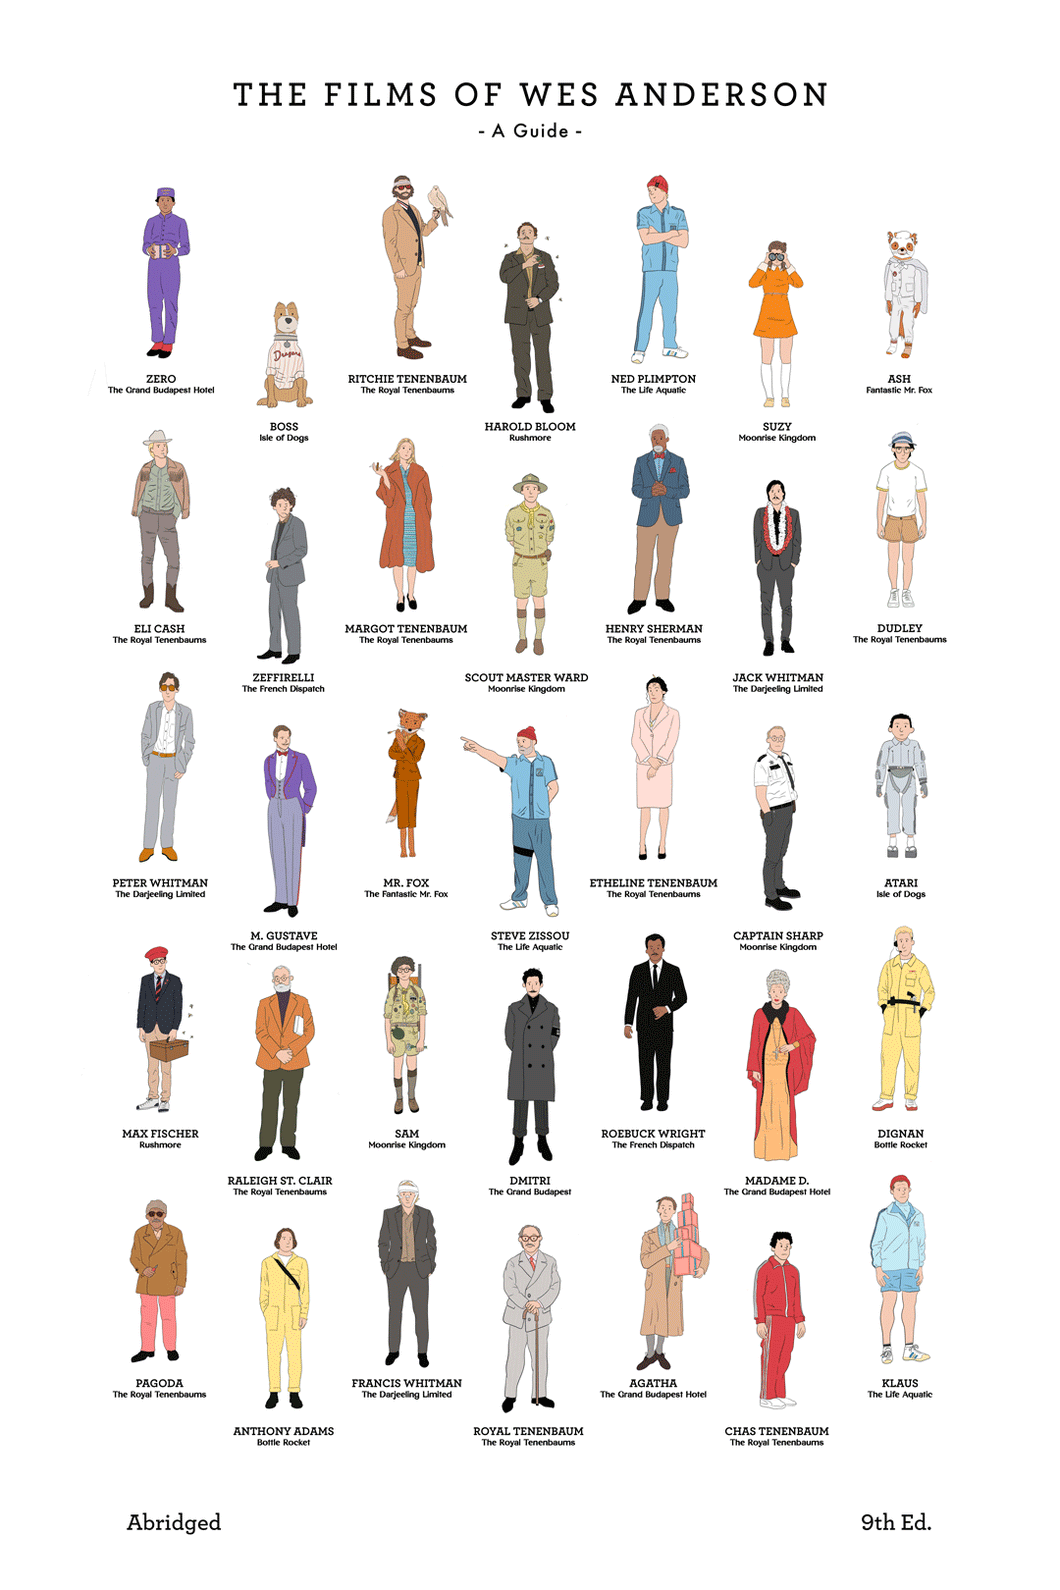 The Films of Wes Anderson (9th Edition)